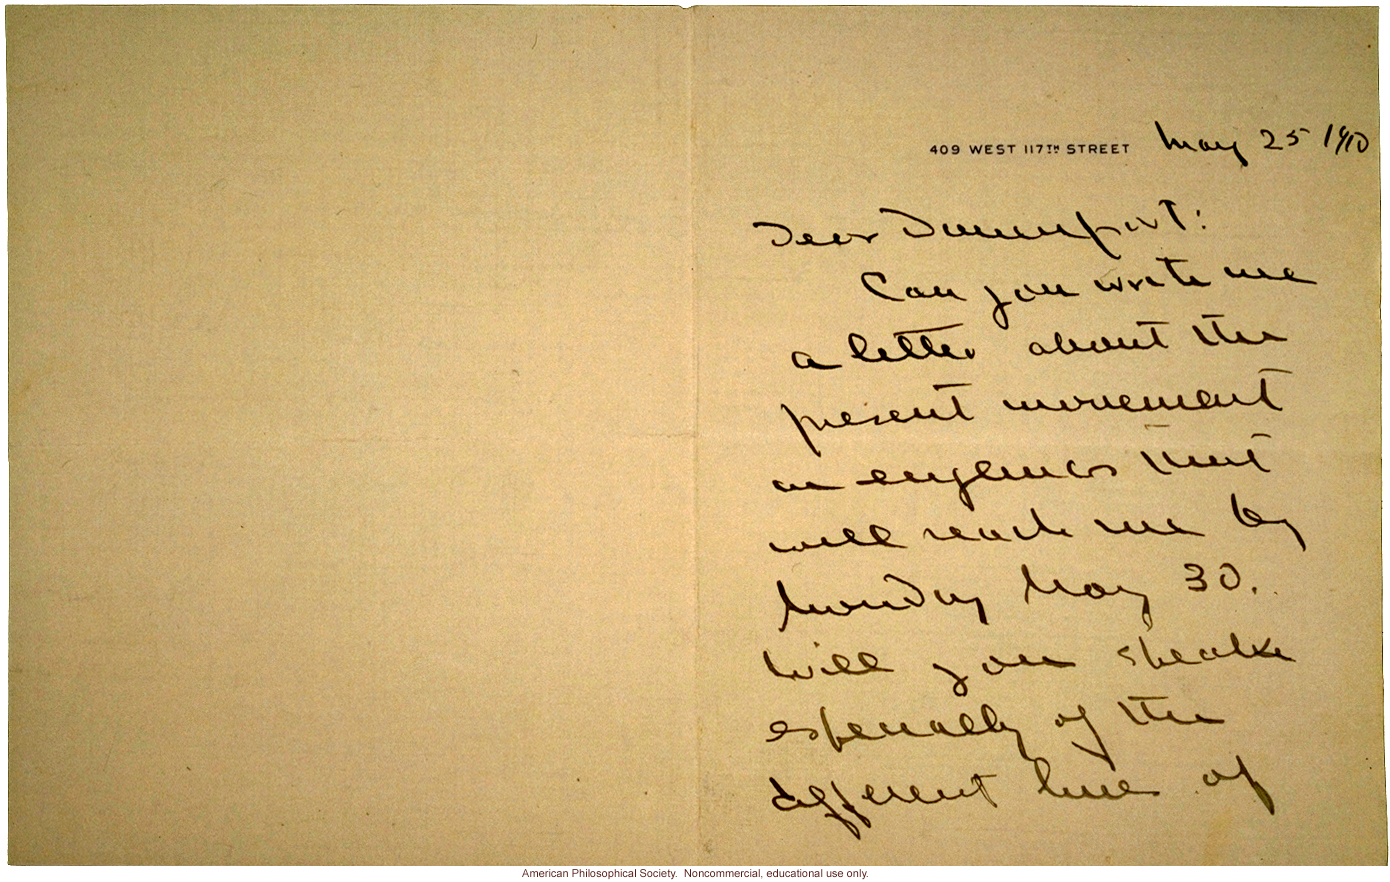 T.H. Morgan letter to Charles Davenport requesting eugenics information